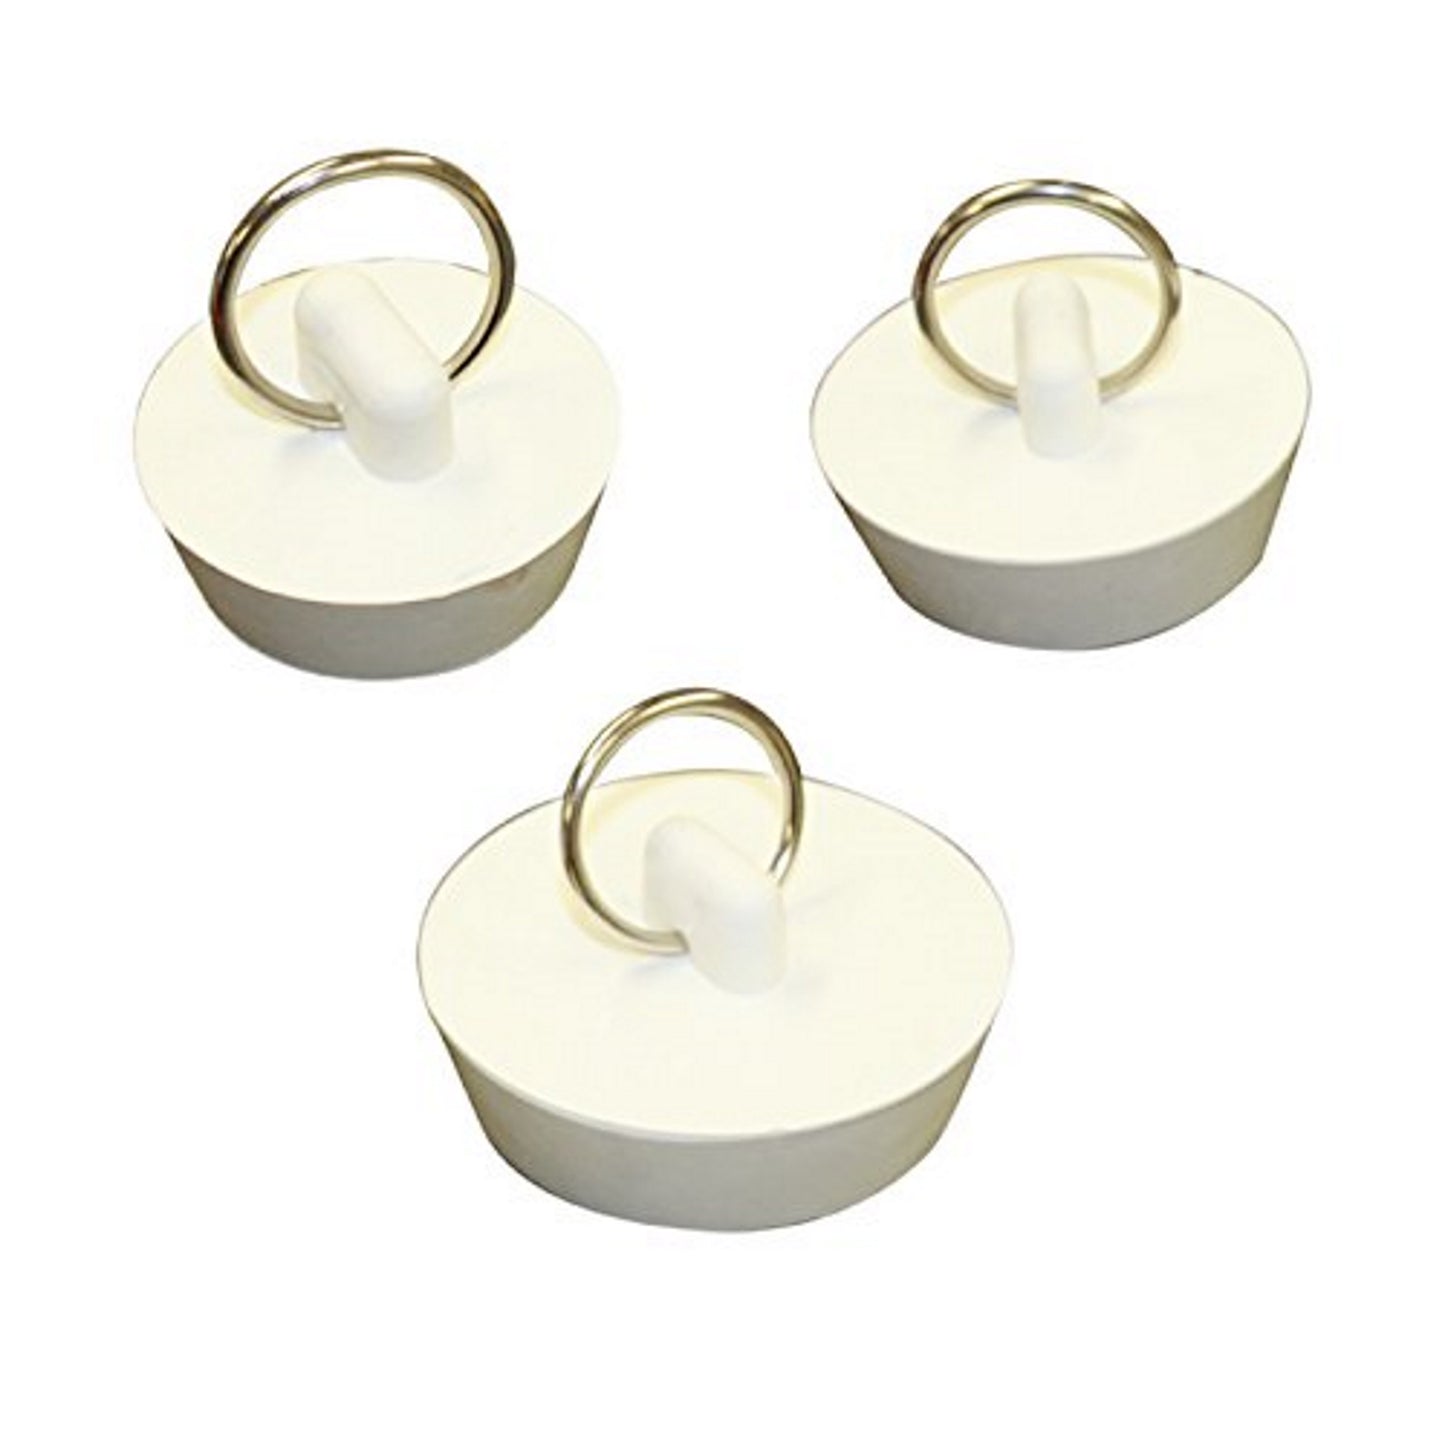 Drain Stopper, Rubber Sink Stopper Drain Plug with Pull Ring for Bathtub, Kitchen, Bathroom, Laundry Sink, 3 Different Sizes, White